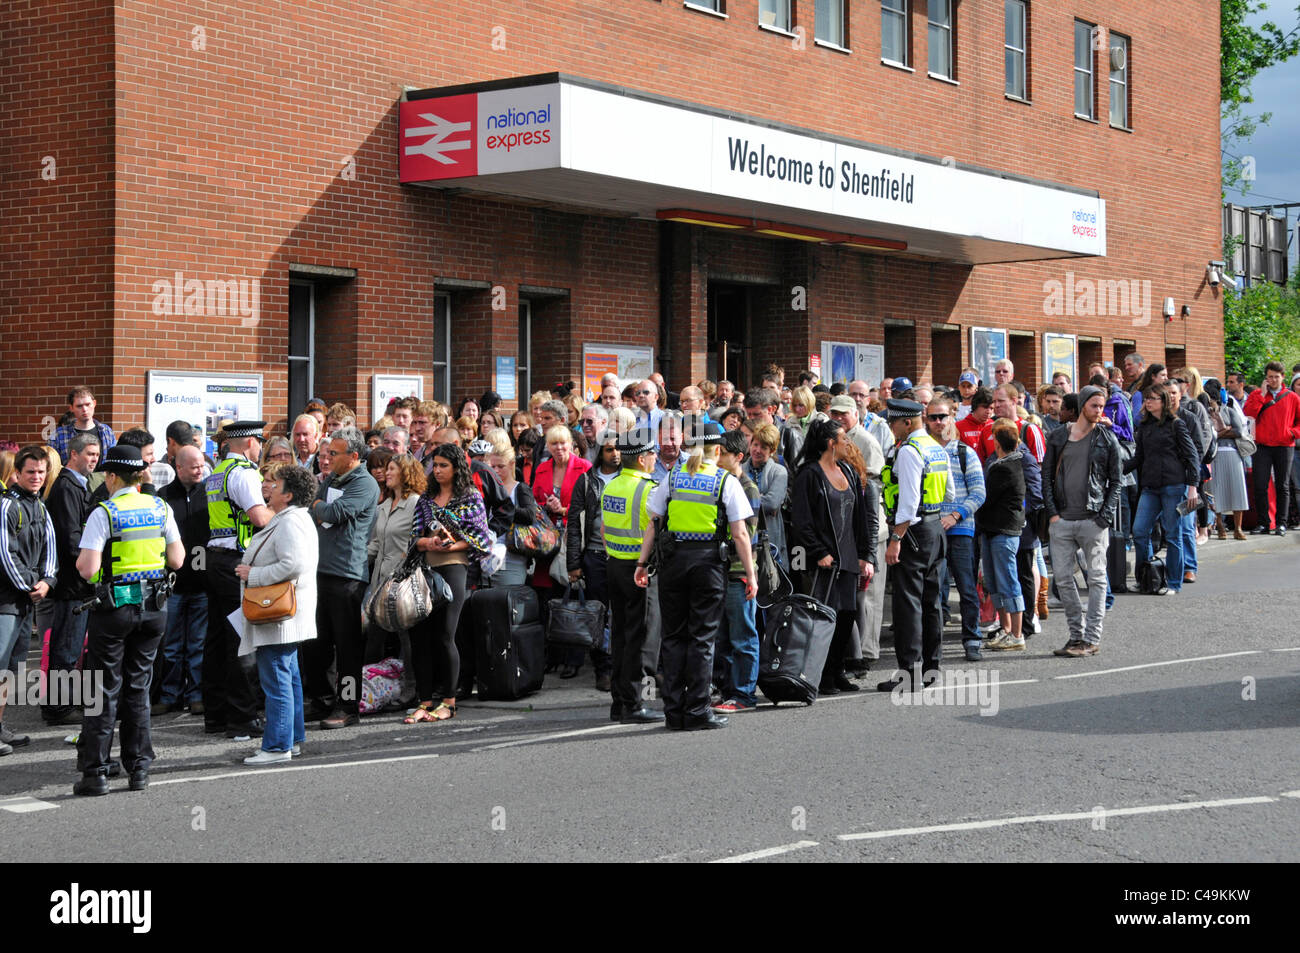 British Transport Police controlling crowds outside railway station waiting for buses after train cancellations & signal failure Stock Photo